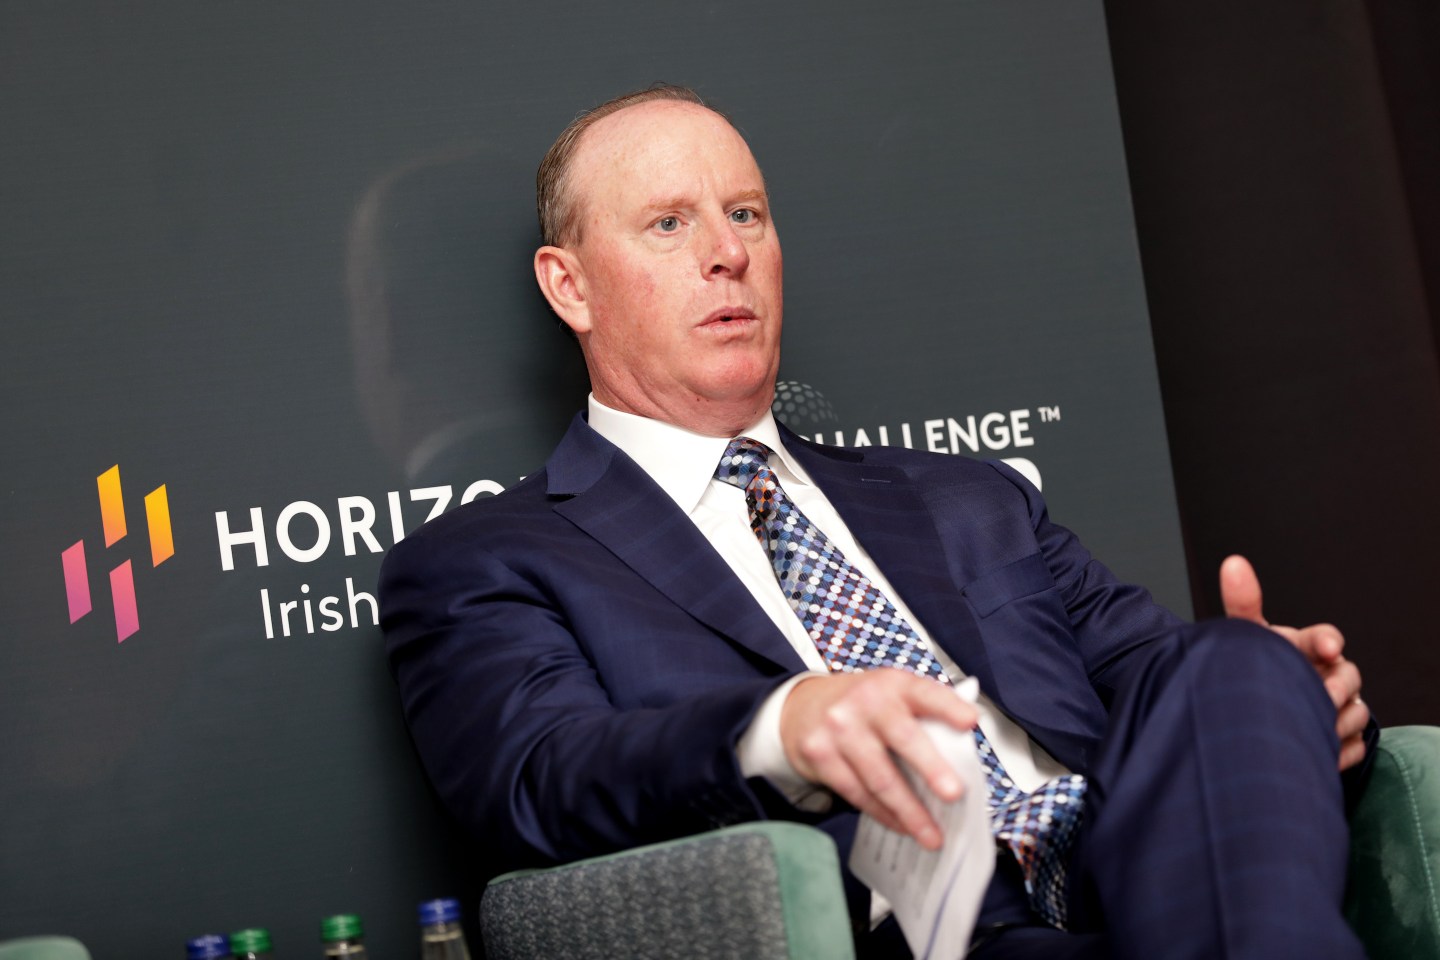 STRAFFAN, IRELAND &#8211; APRIL 25: Tim Walbert, Chairman, President and CEO of Horizon Therapeutics attends the Horizon Irish Open announcement at The K Club on April 25, 2022 in Straffan, Ireland. The K Club to host Horizon Irish Open in 2023, 2025 and 2027. (Photo by Patrick Bolger/Getty Images)